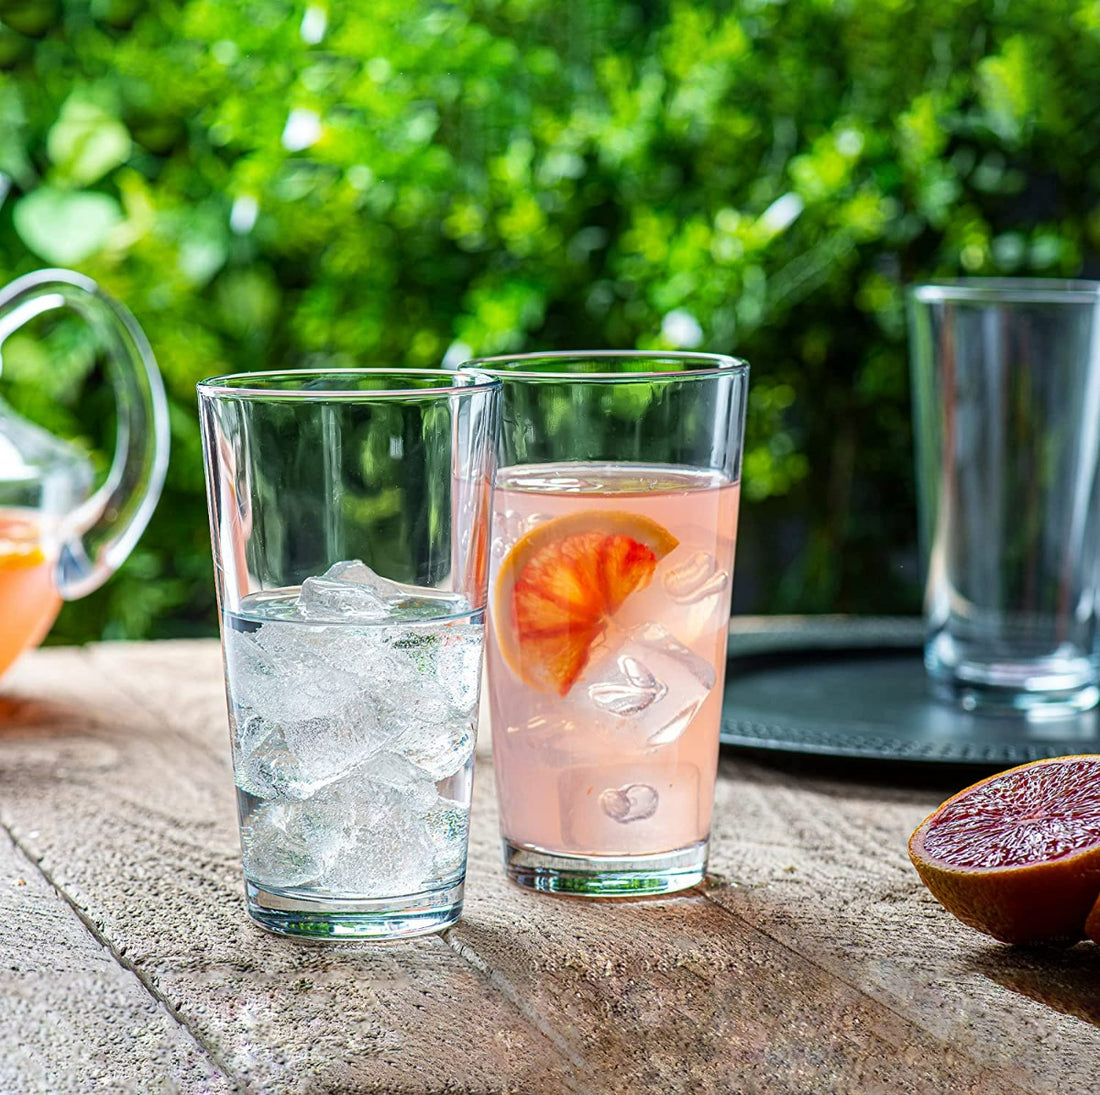 Drinking Glasses: How to Select the Best Drinking Glasses